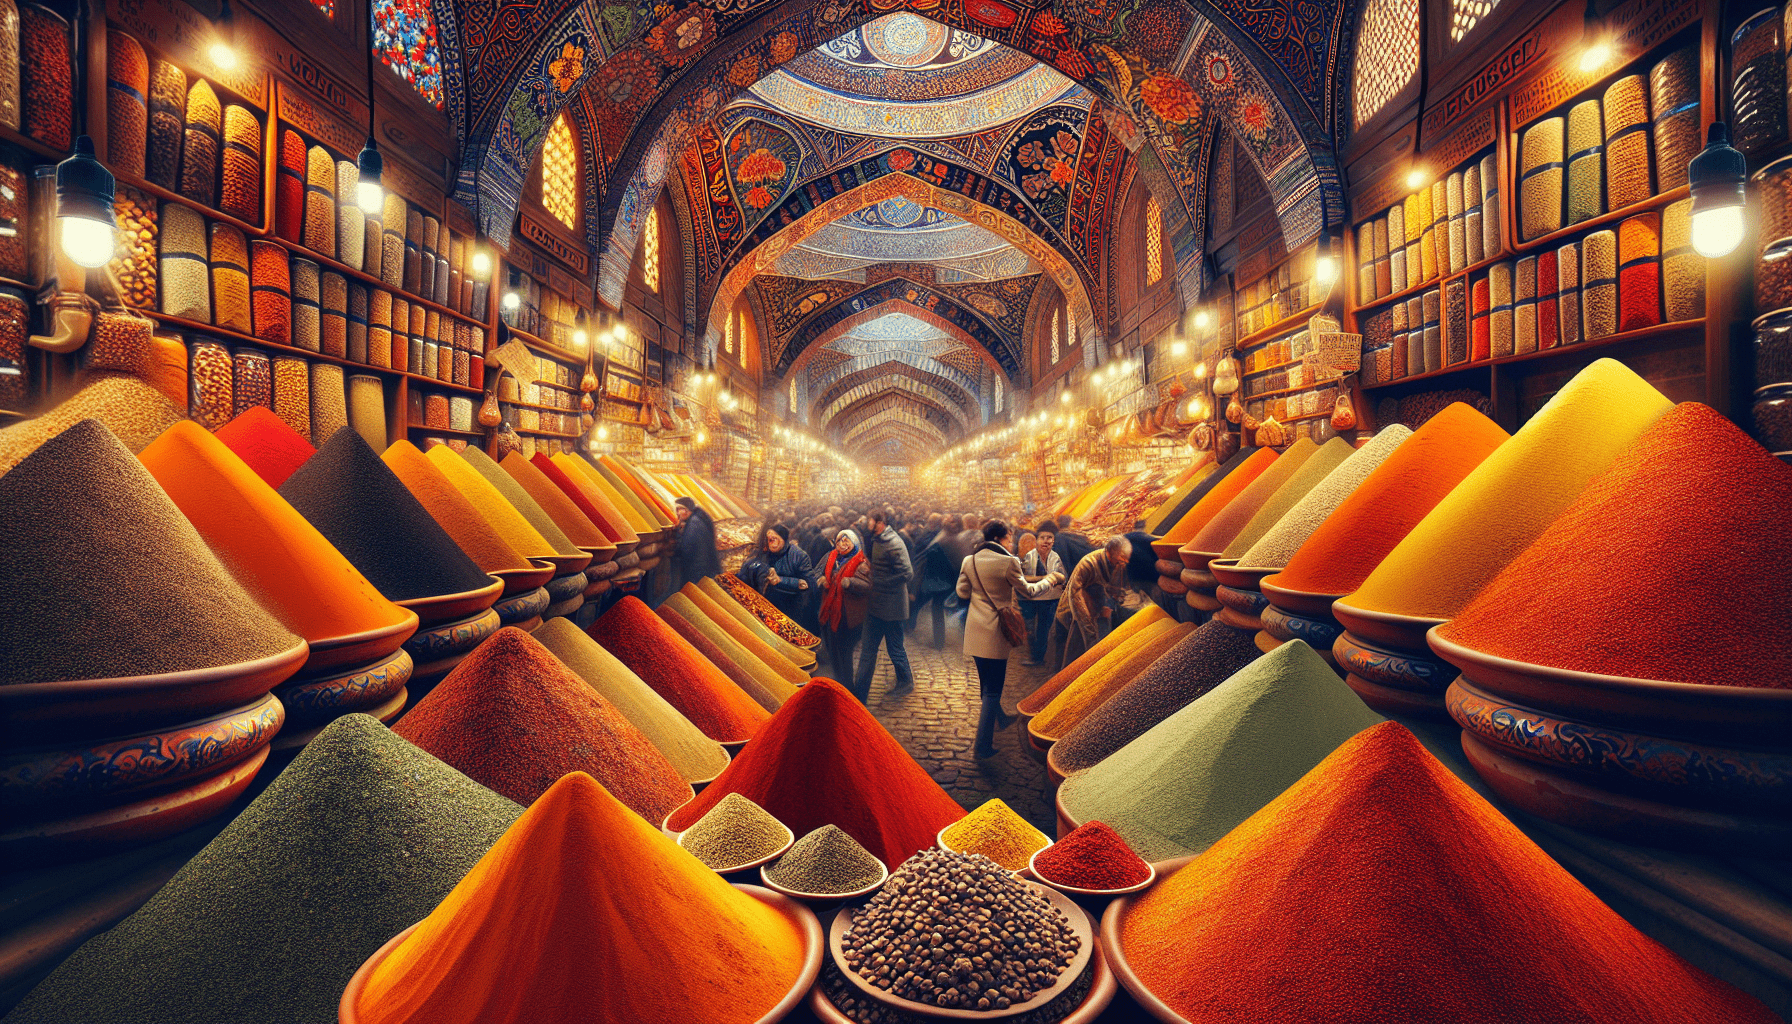 A Foodie’s Guide To The Spice Bazaars Of Turkey